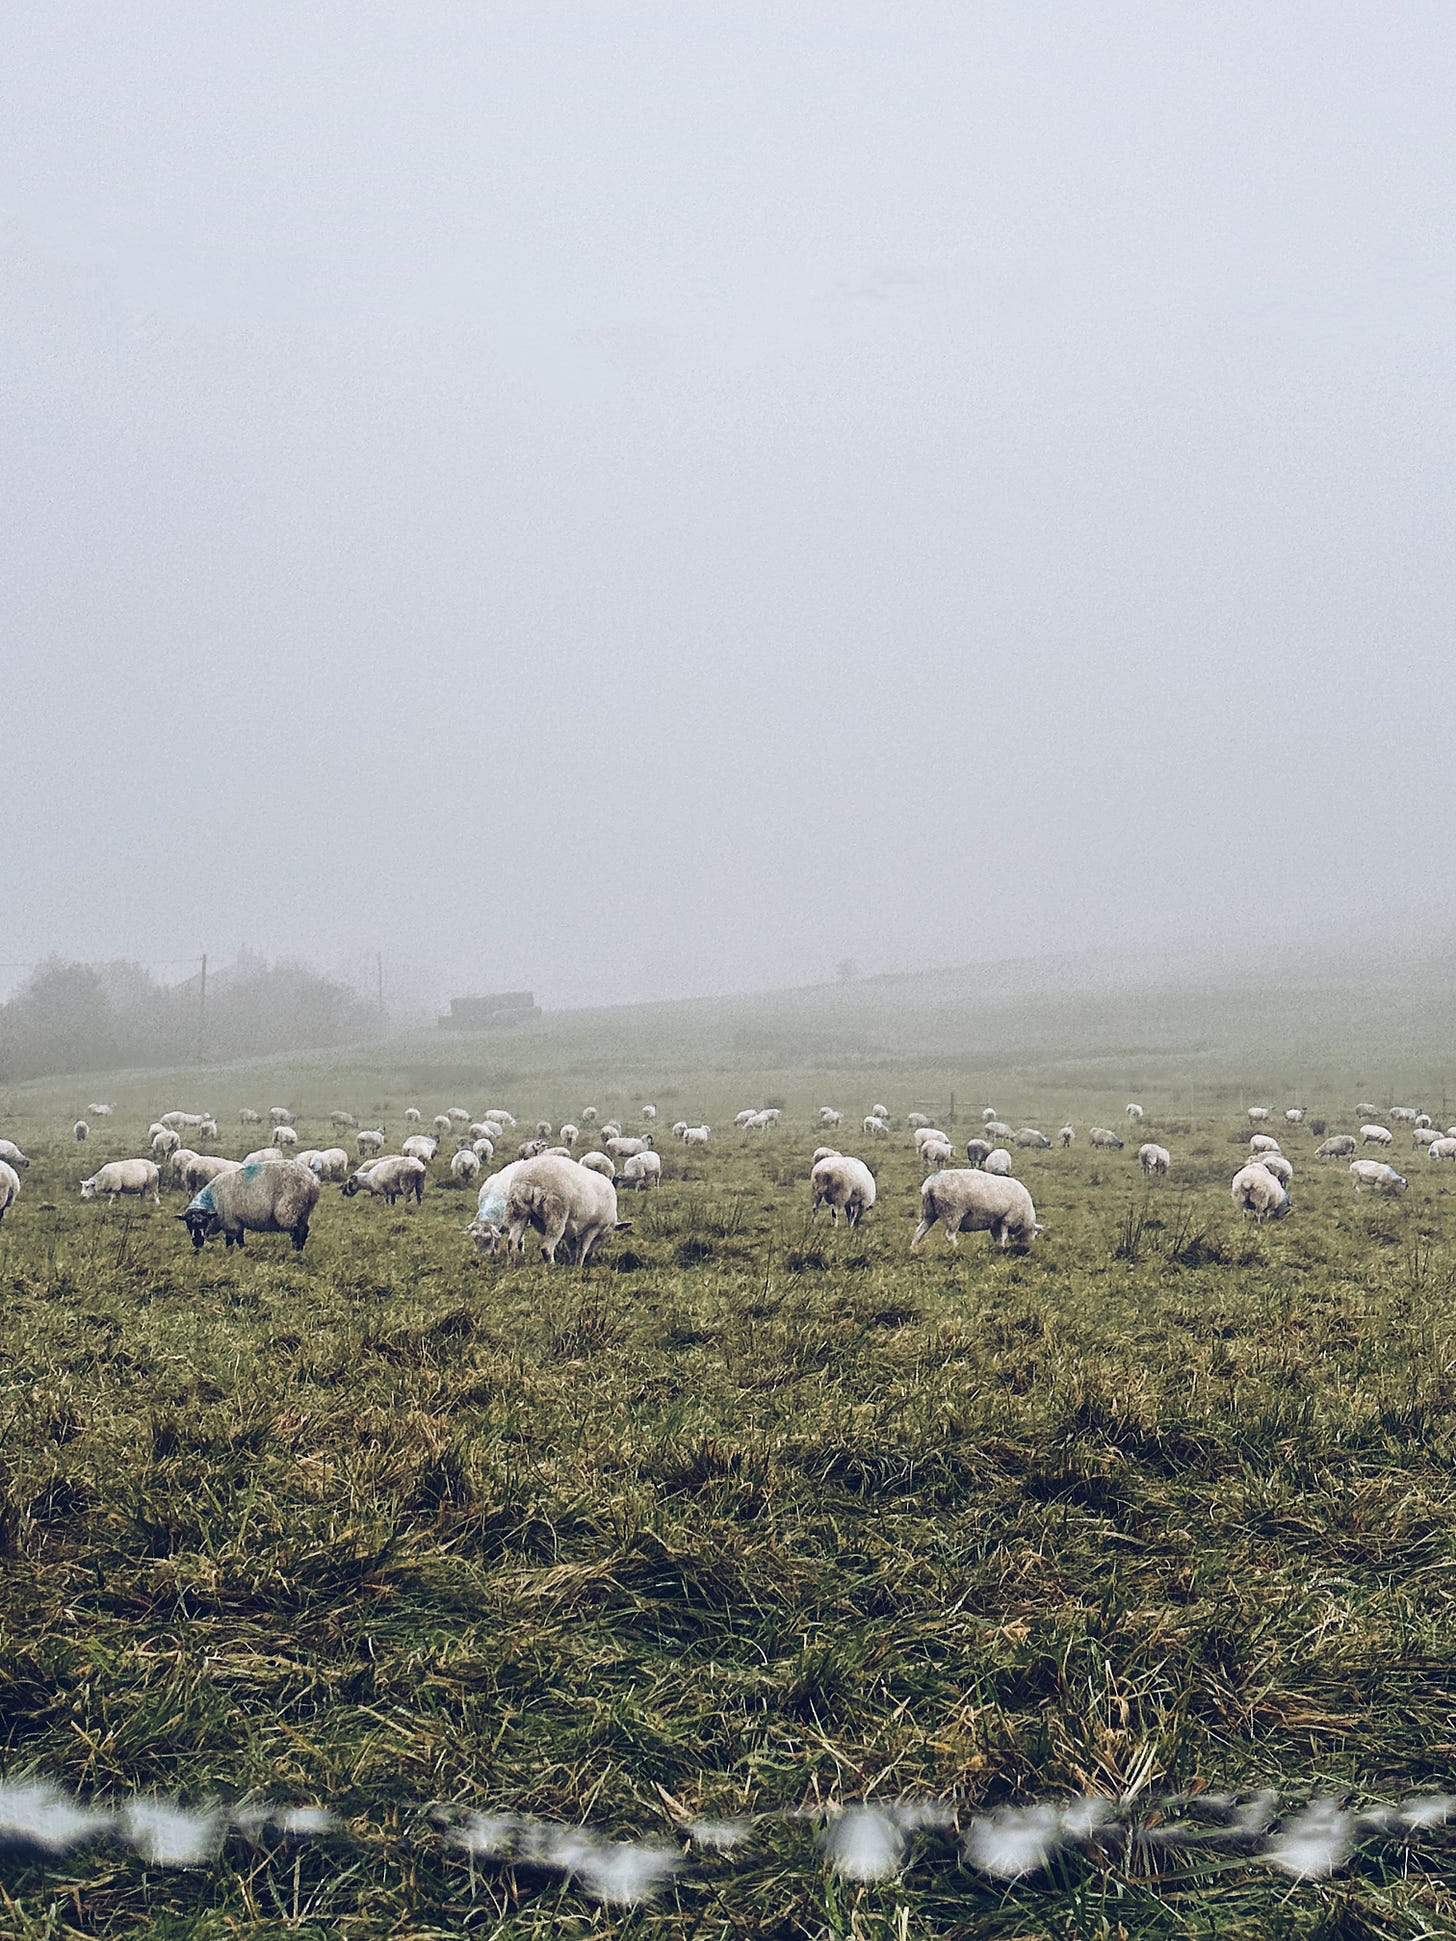 a cold, foggy field with lots of white sheep in it. In the foreground there is a piece of barbed wire fence with raindrops.